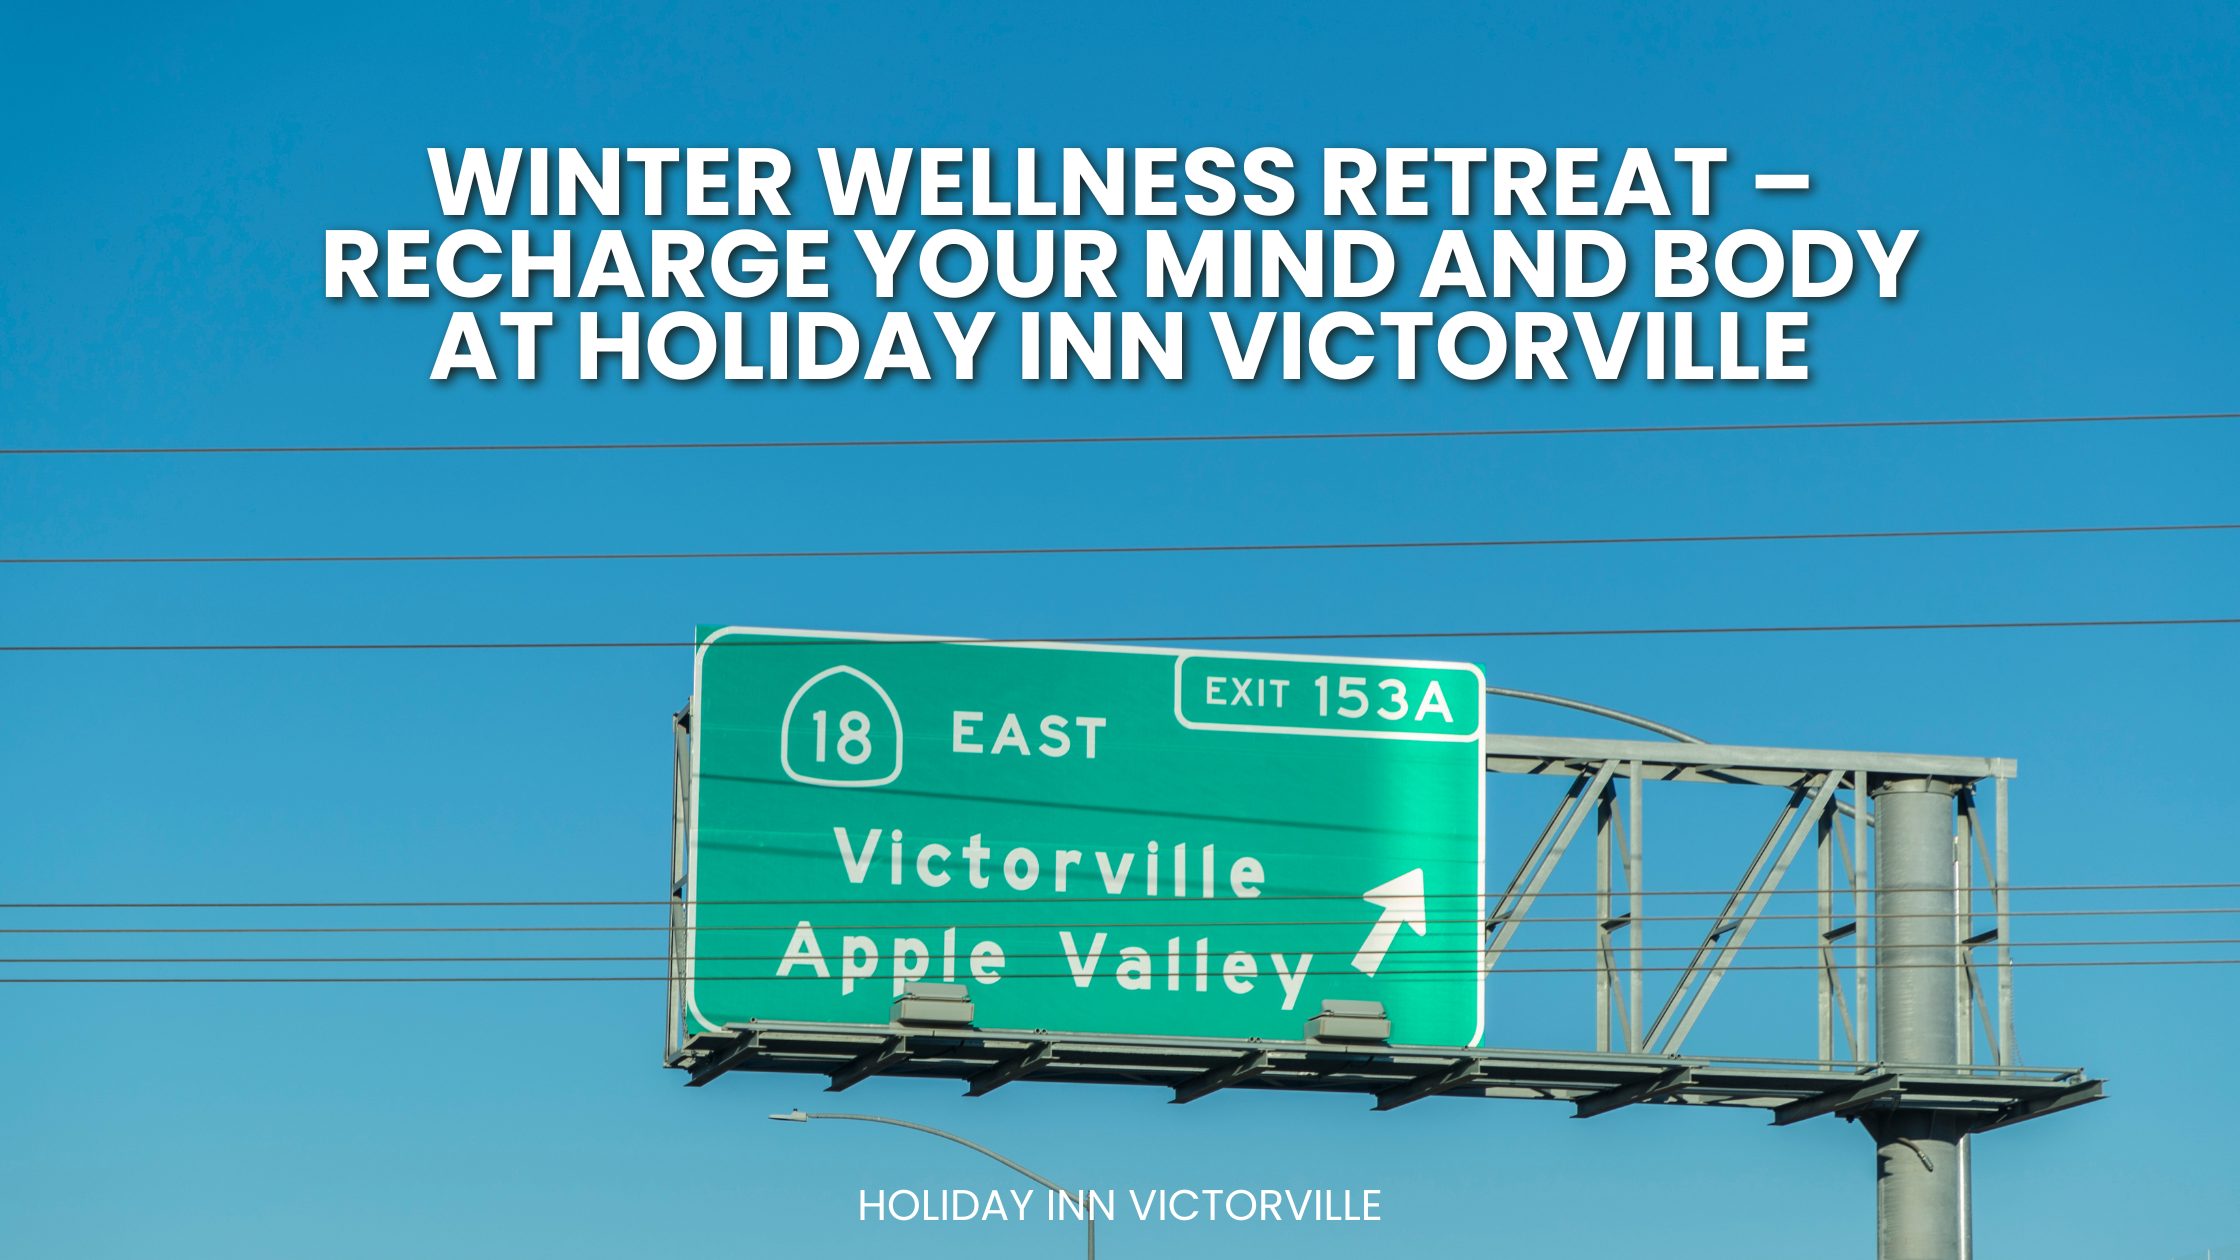 Winter Wellness Retreat – Recharge Your Mind and Body at Holiday Inn Victorville